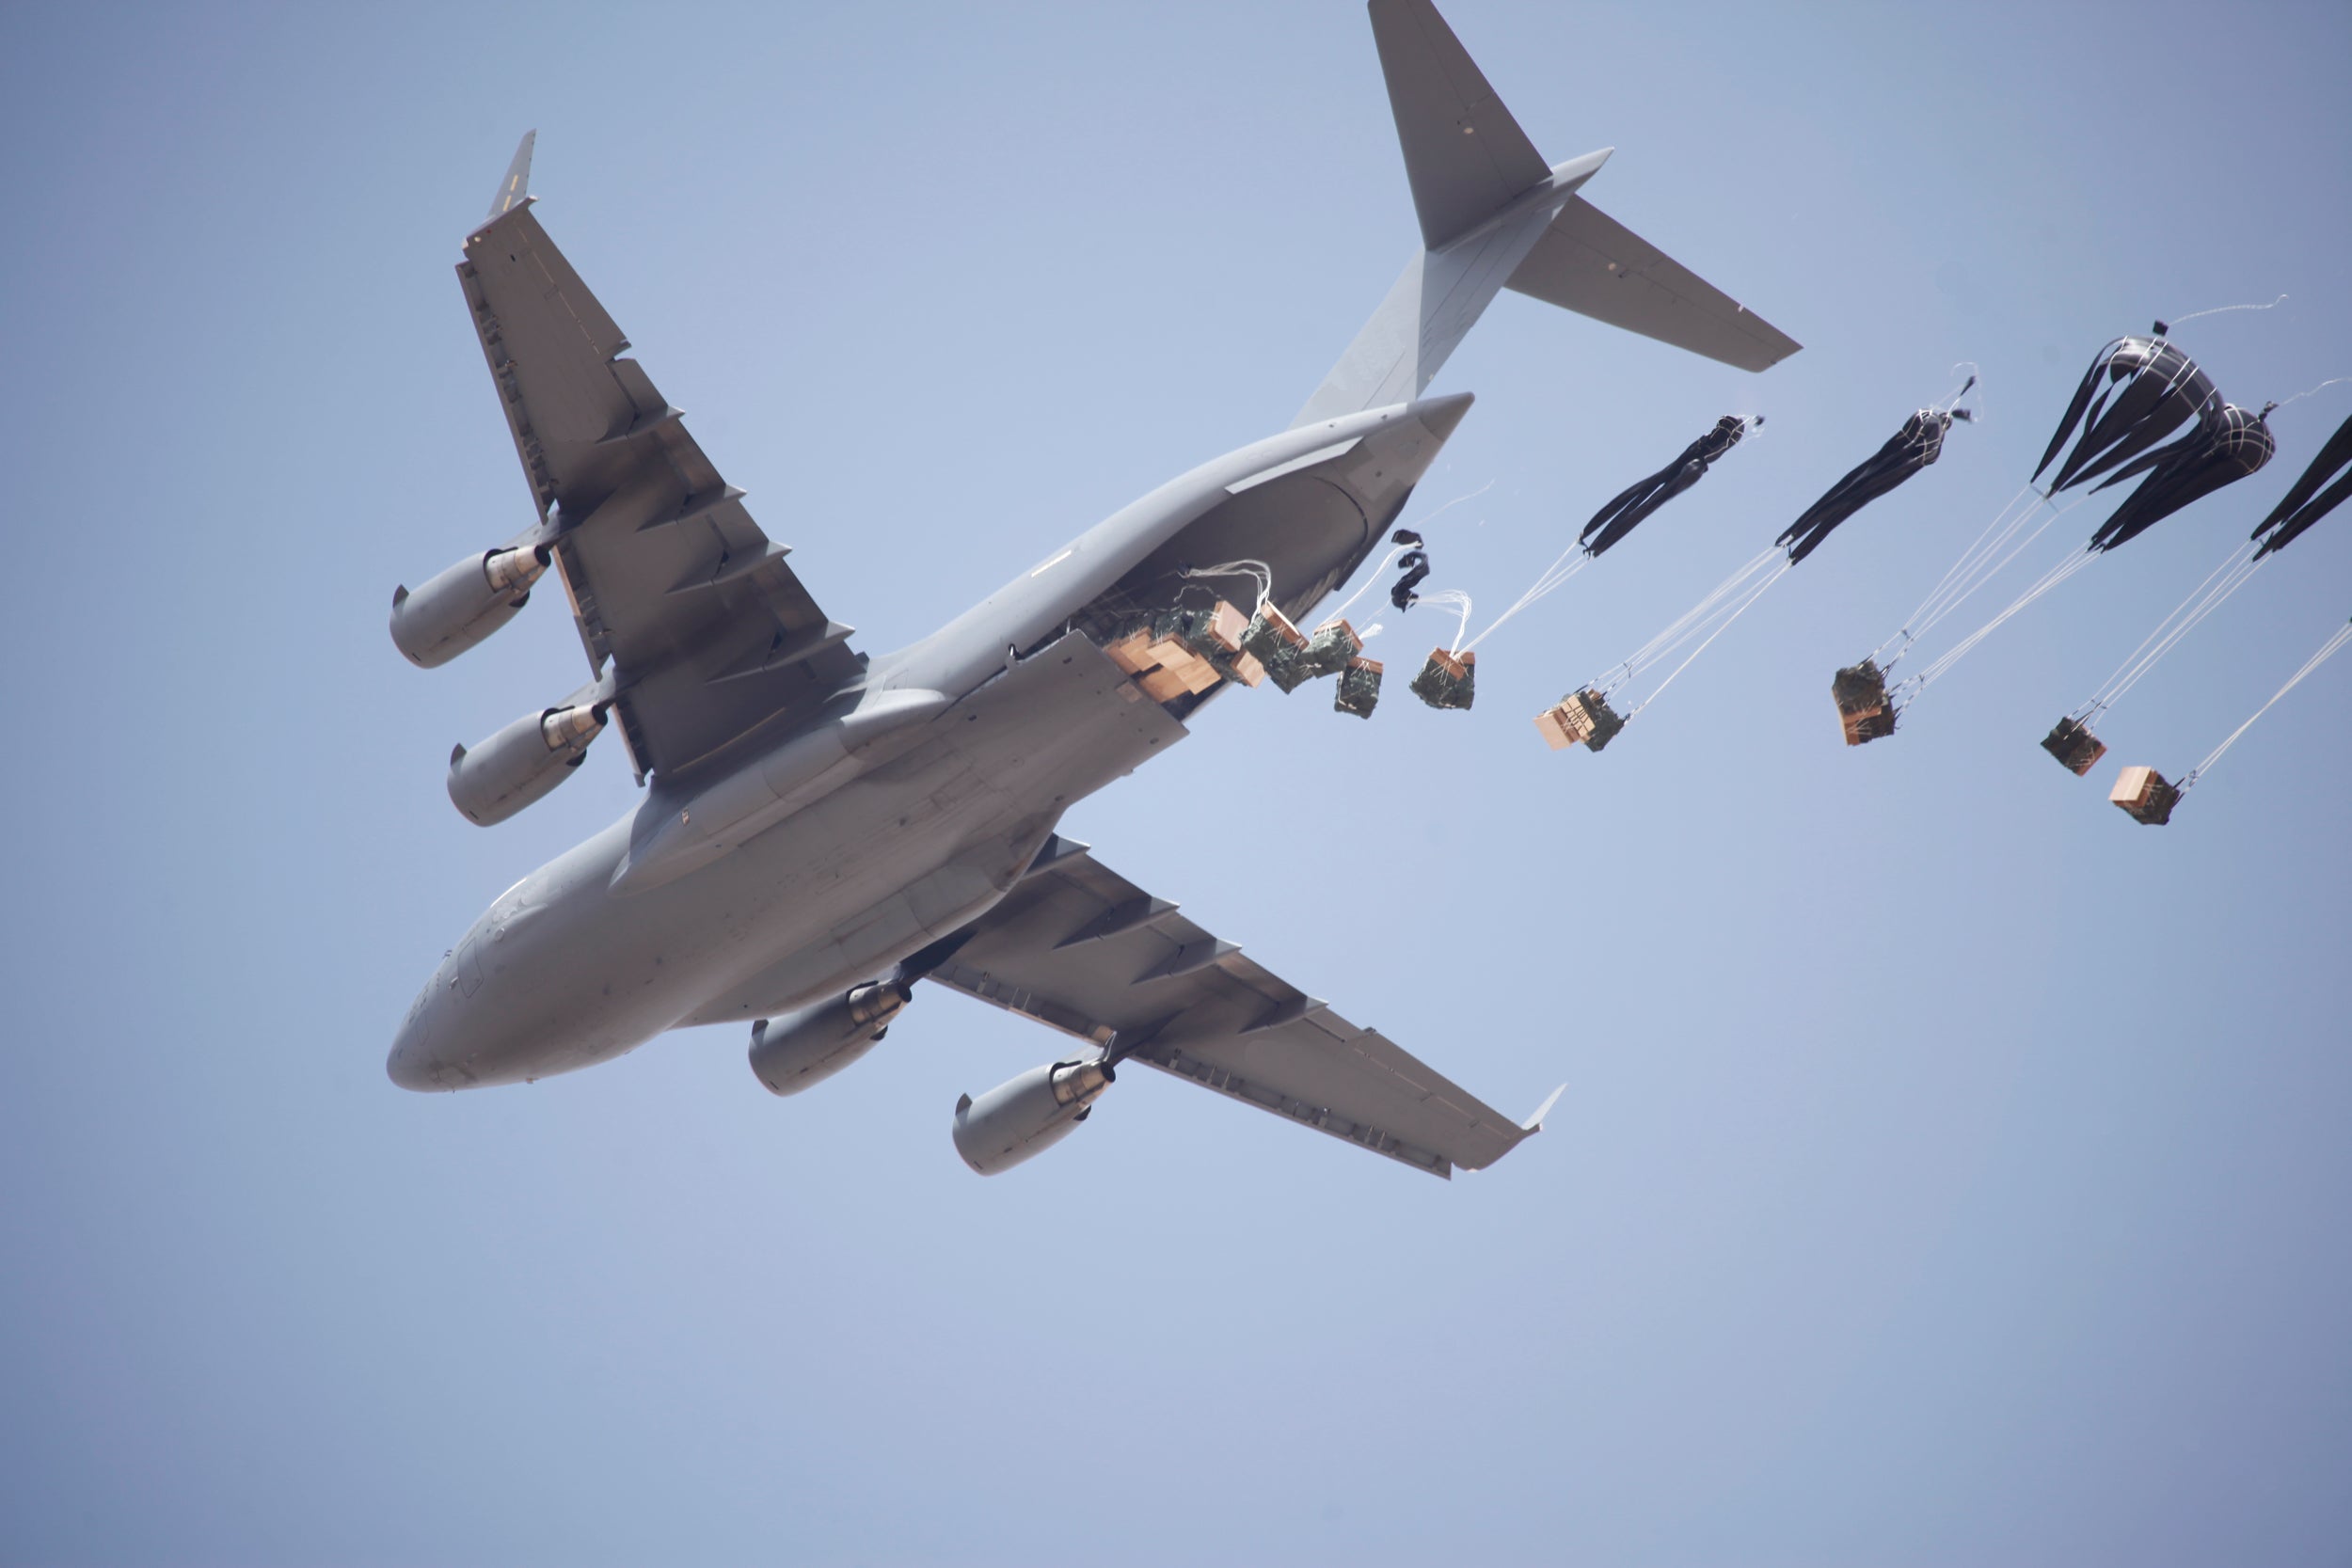 Airdrop of high velocity cargo parachutes deploying from a large c130 airplane.